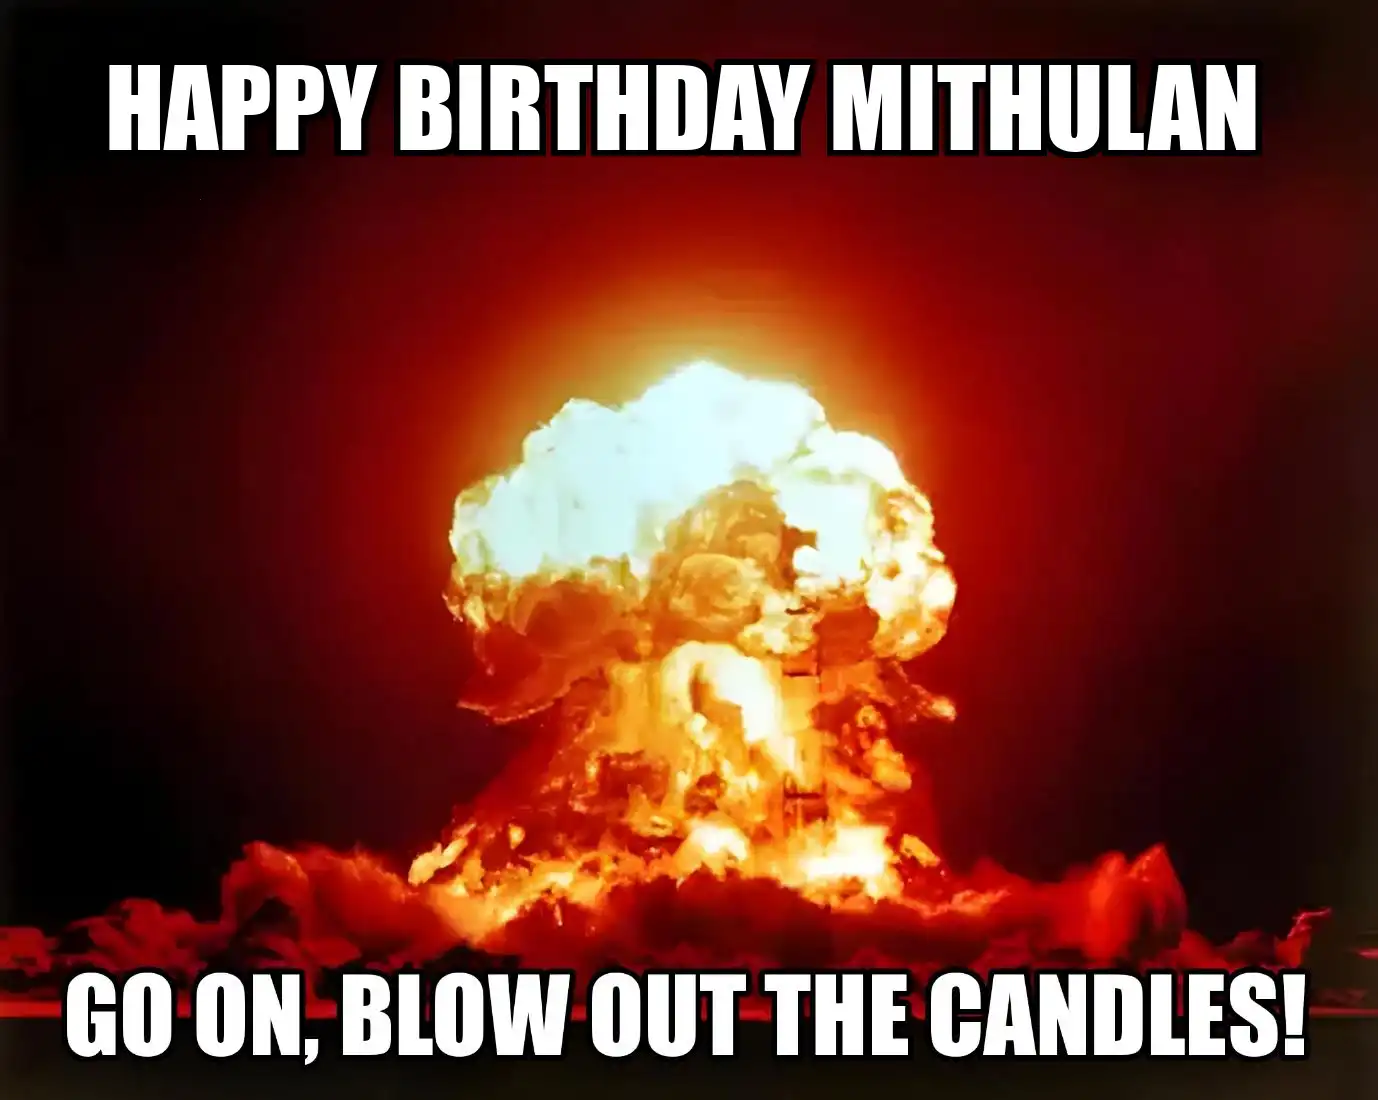 Happy Birthday Mithulan Go On Blow Out The Candles Meme